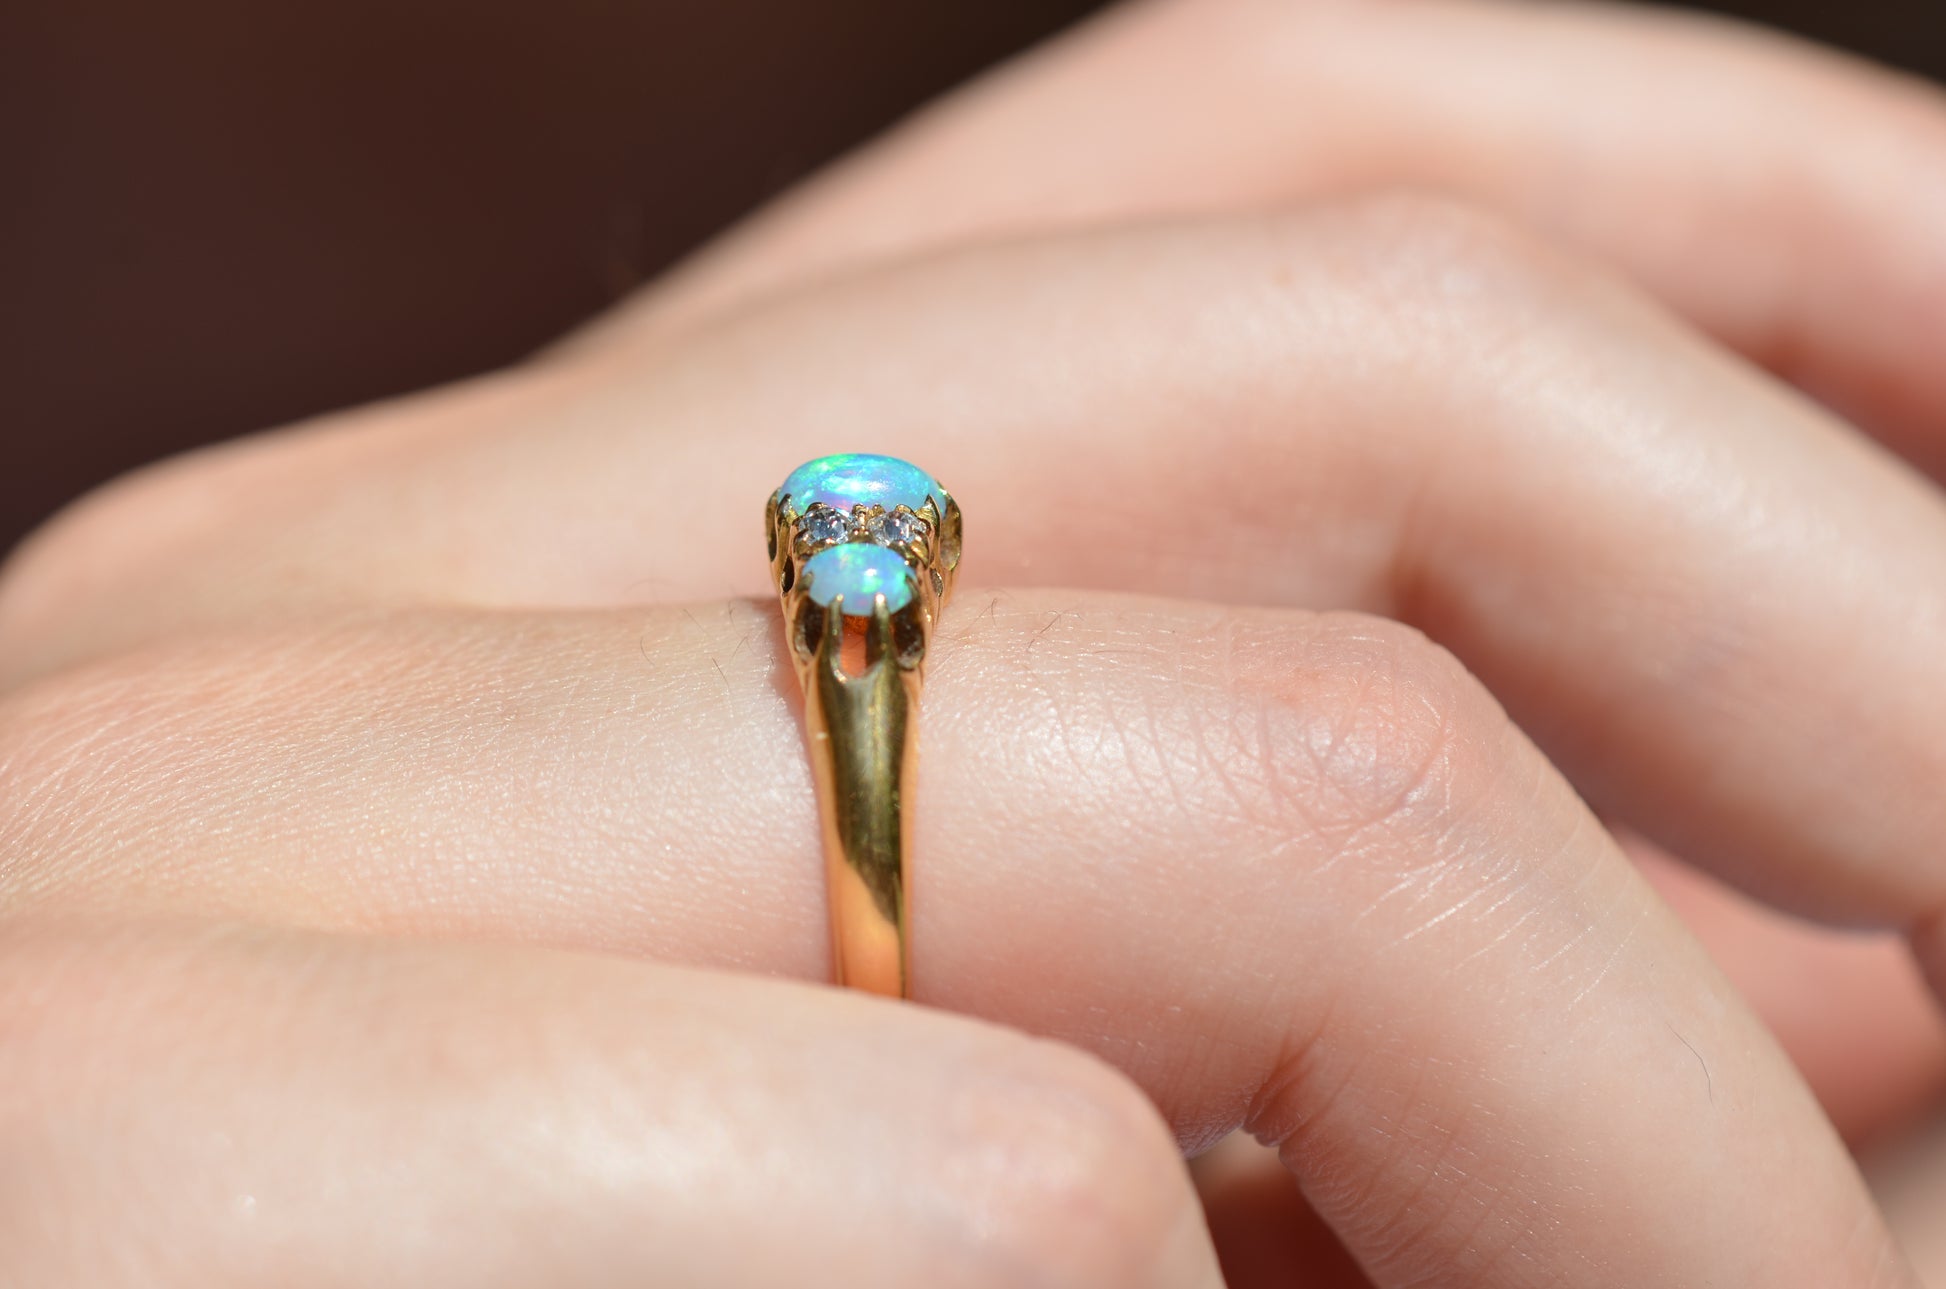 A very tightly cropped macro of the ring on a Caucasian model, showing the scale to the ring on the hand as well as the play of color of the opals in direct sunlight. While the most prominent colors are blue with green and violet, a flame of orange is visible to one side. The ring is photographed from the side to show the low rise off the finger.